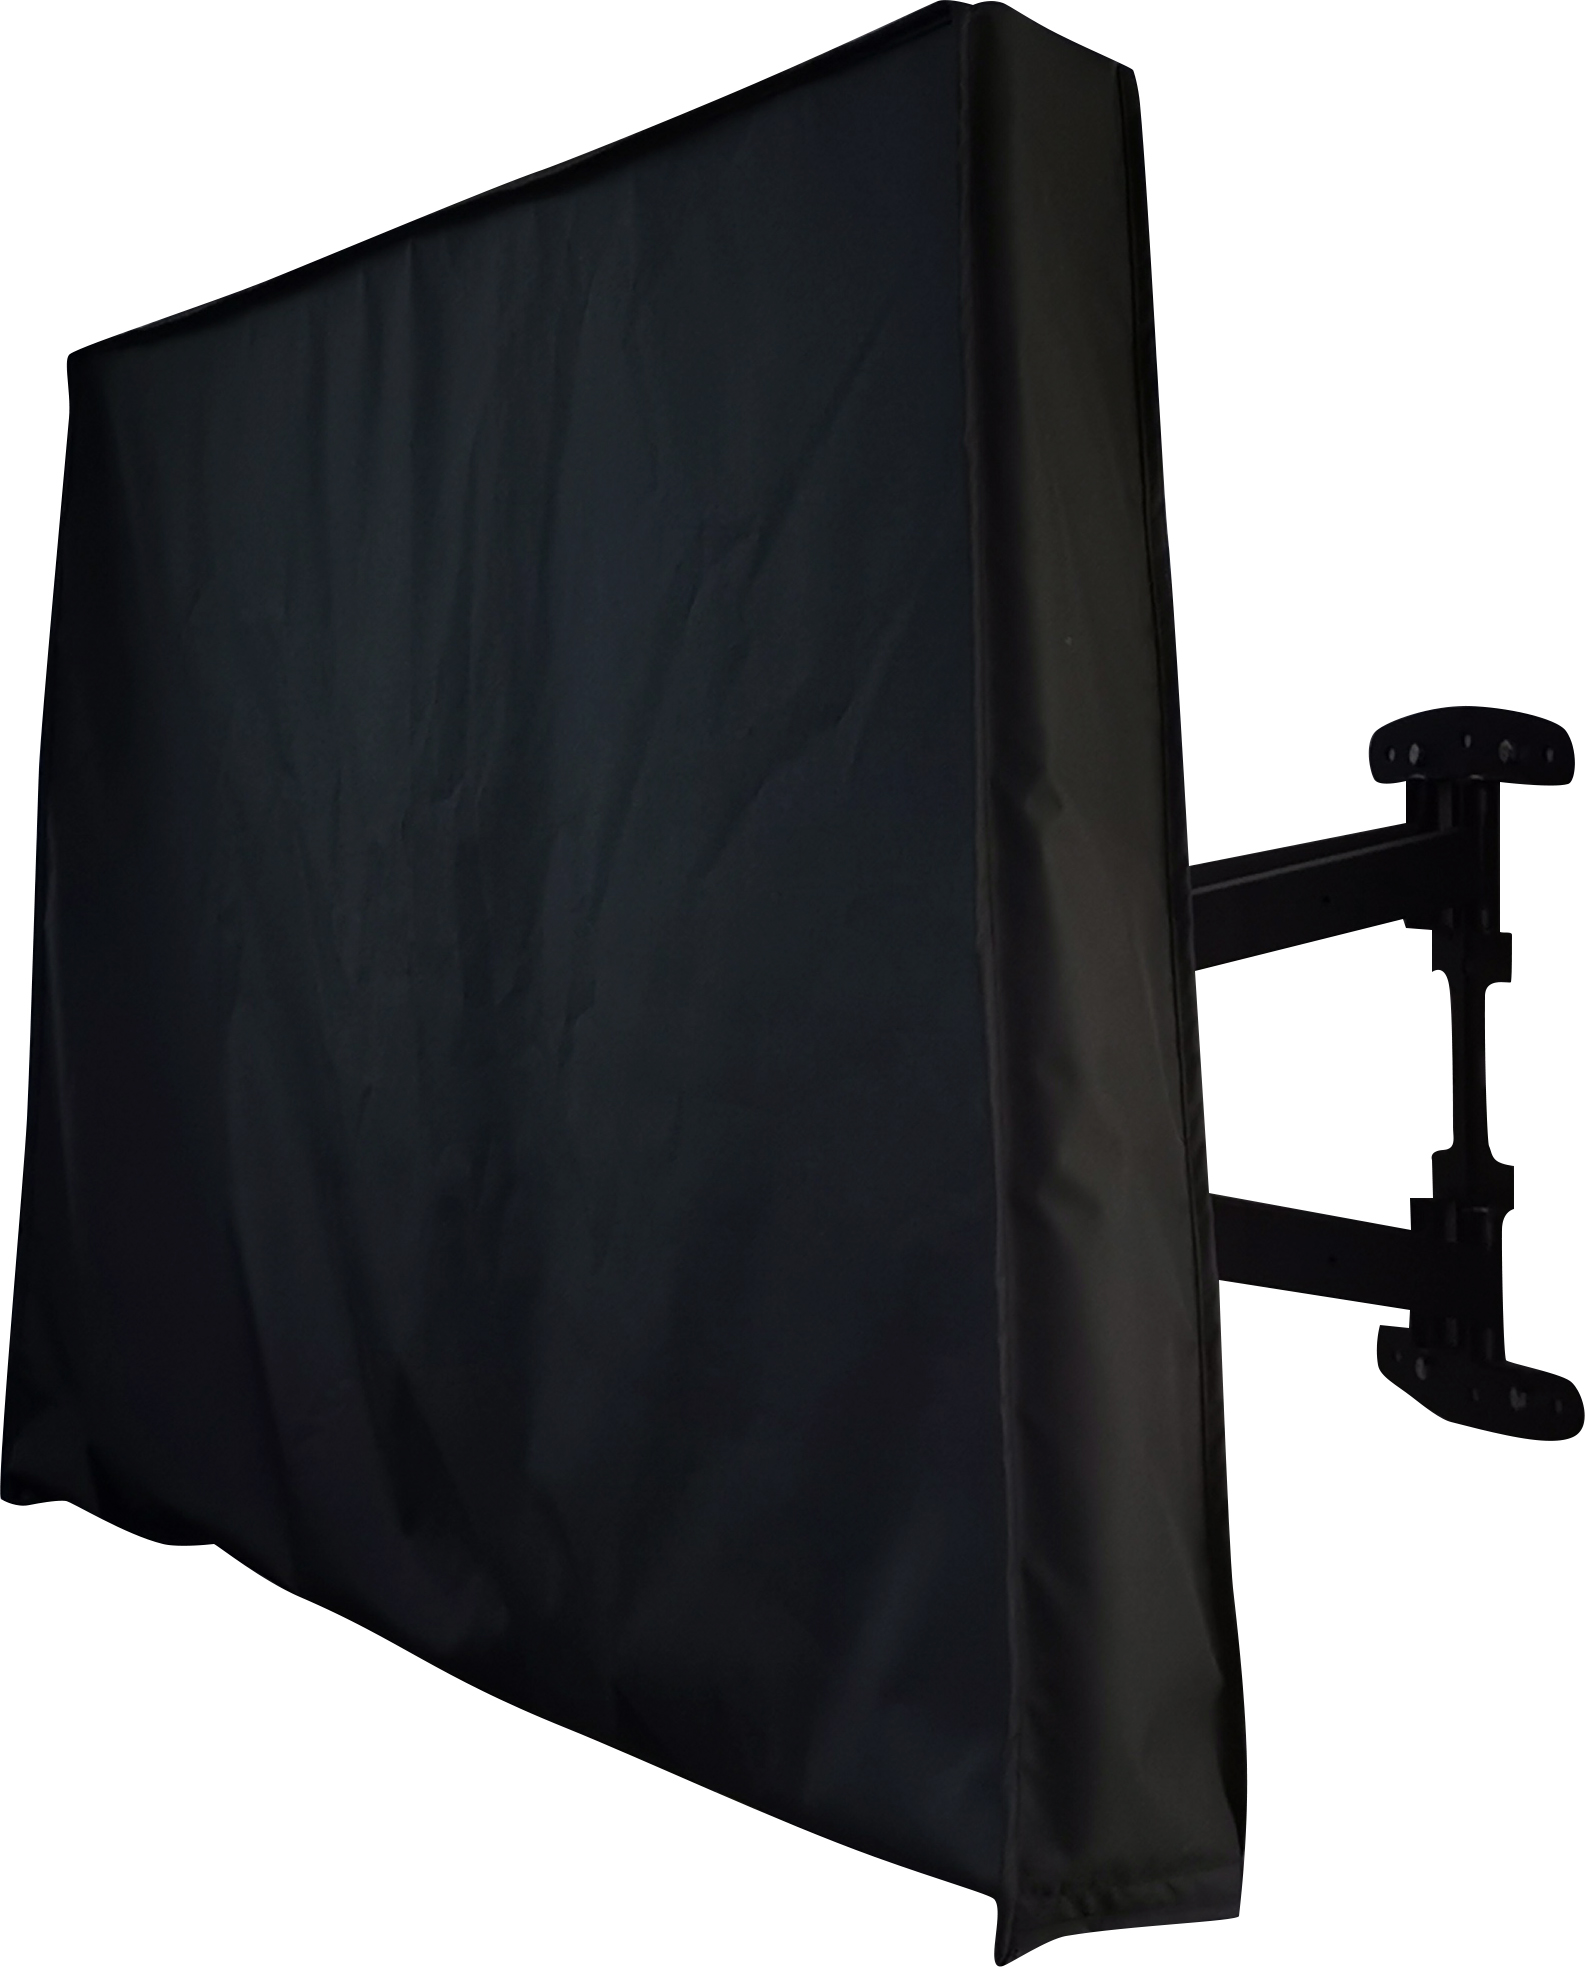 OUTDOOR TV COVER 65''